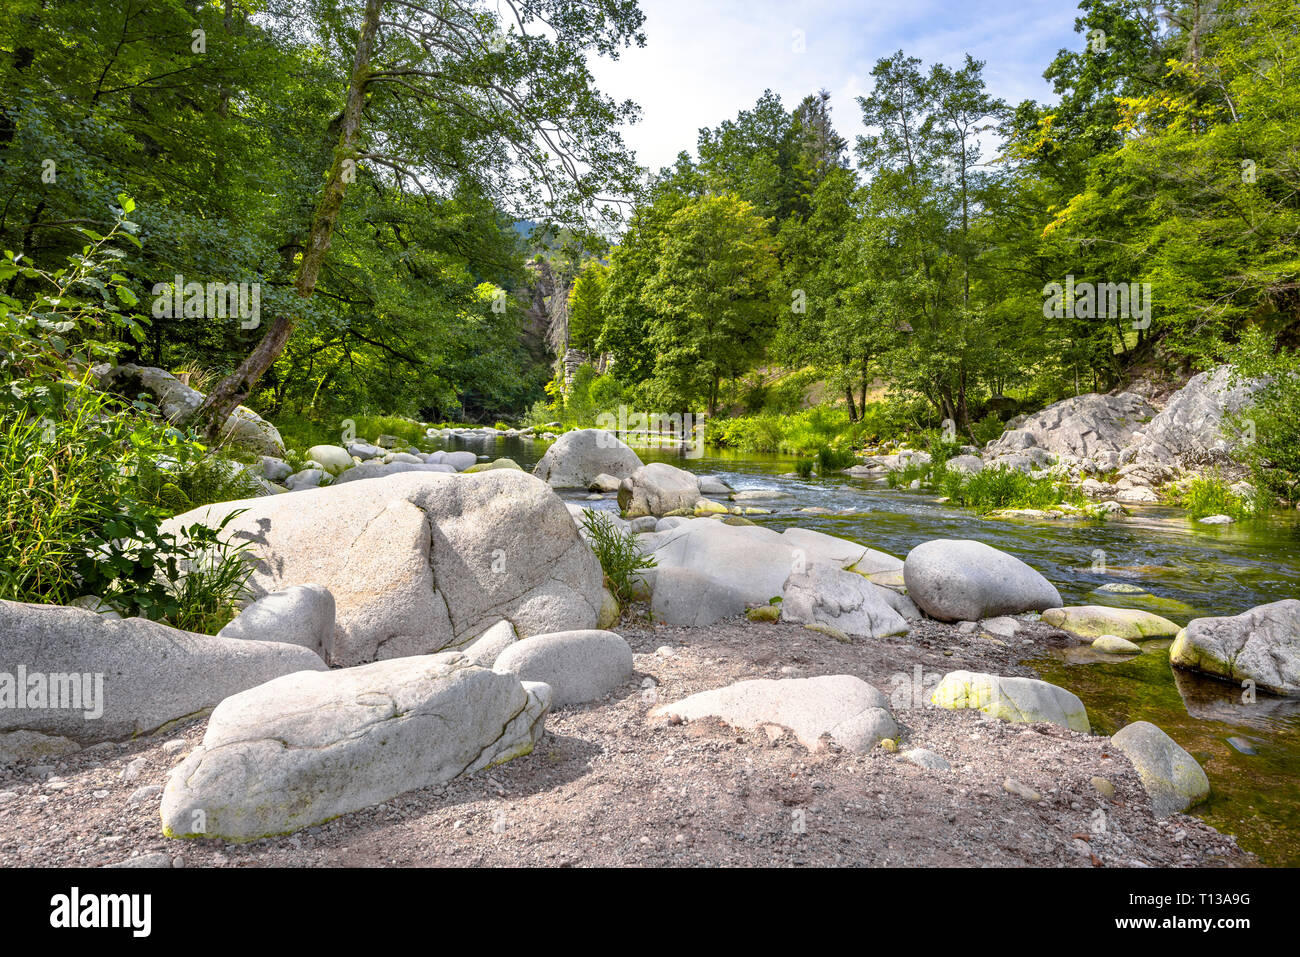 riverside with big boulders of the river Murg, Northern Black Forest, Germany, wild nature in the Murg valley near Forbach Stock Photo